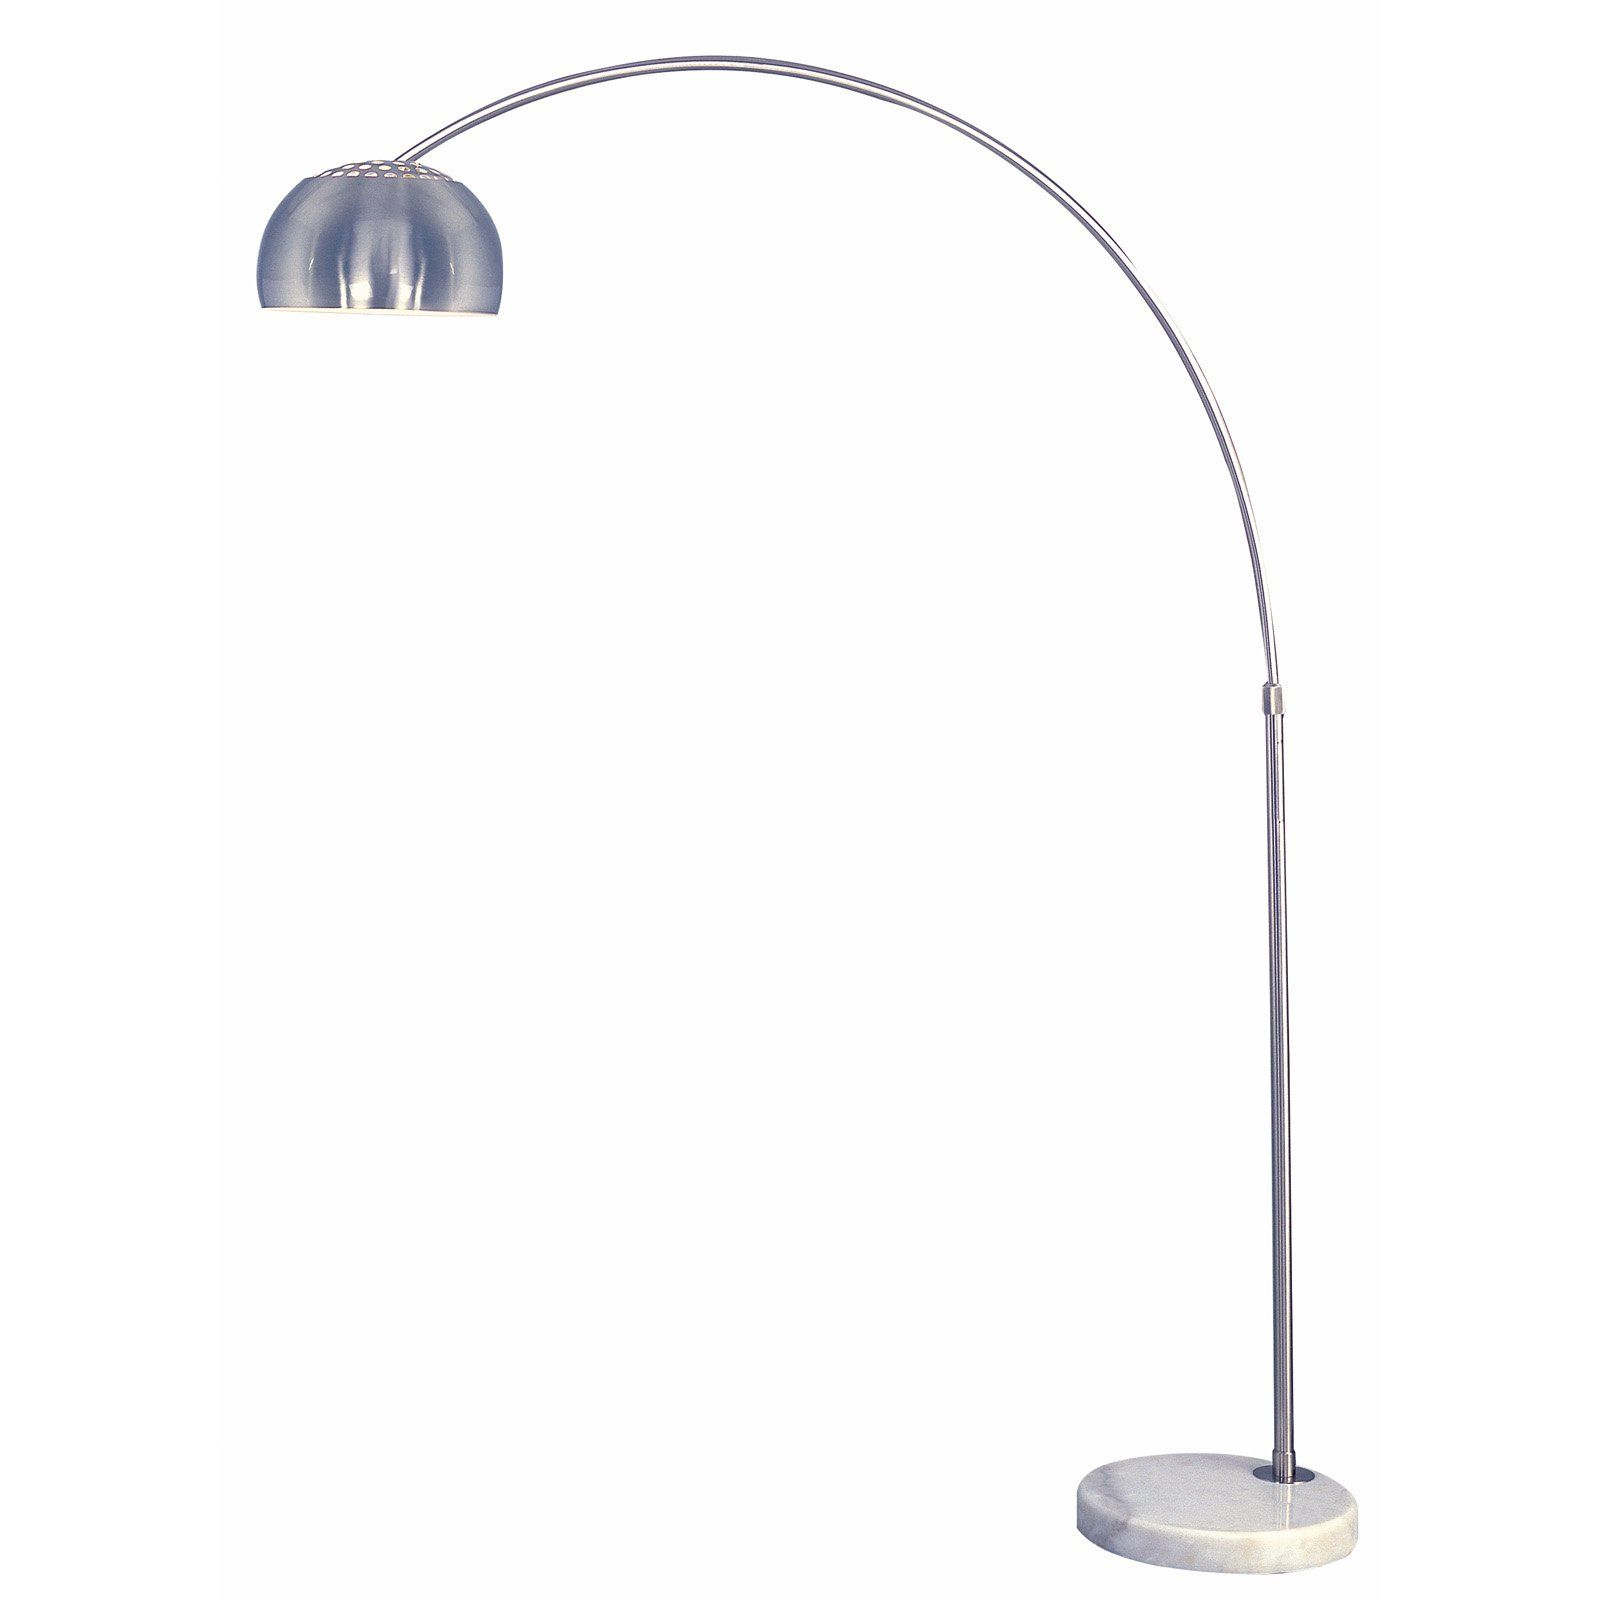 Have To Have It Trend Lighting Tfa8005 Mid Arc Floor Lamp pertaining to size 1600 X 1600